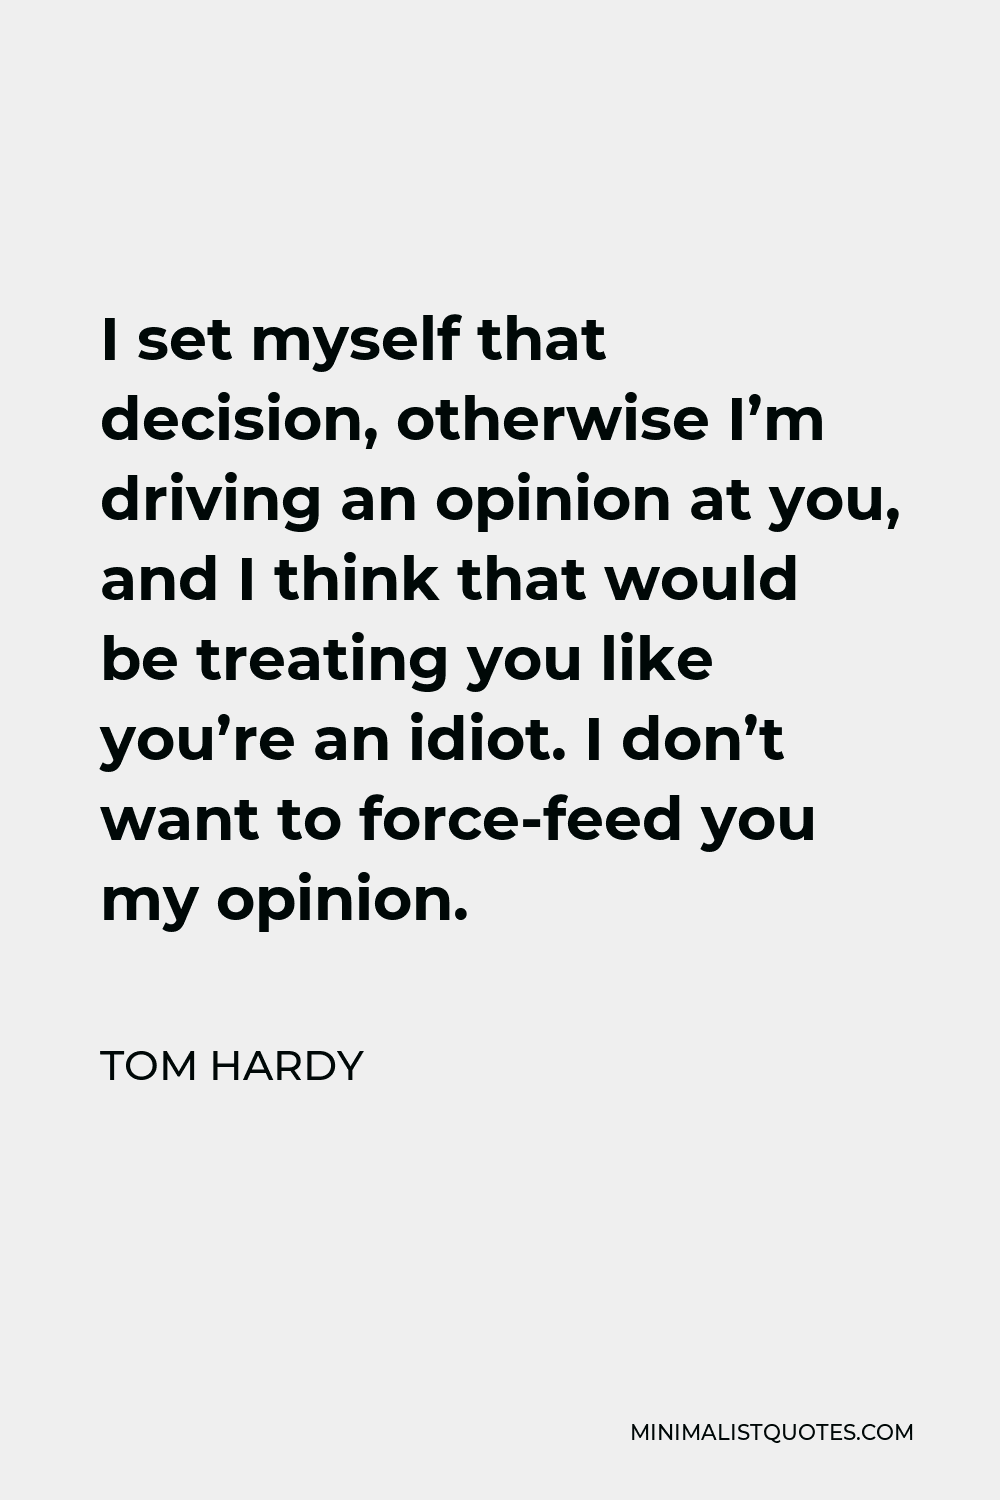 Tom Hardy Quote - I set myself that decision, otherwise I’m driving an opinion at you, and I think that would be treating you like you’re an idiot. I don’t want to force-feed you my opinion.